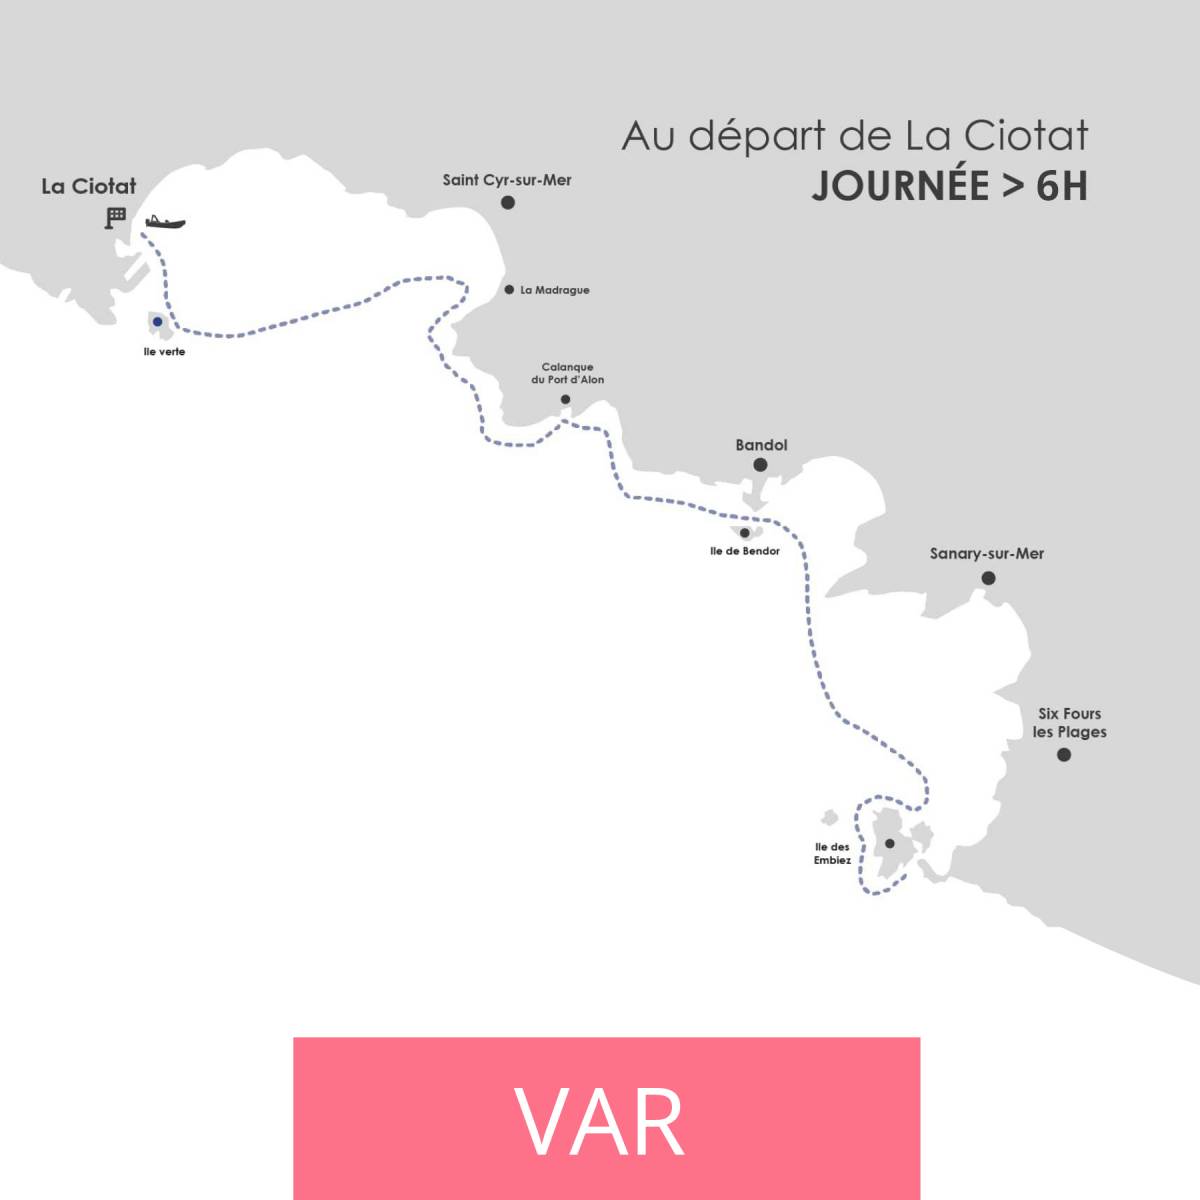 Entire day tour in the Var creeks from La Ciotat